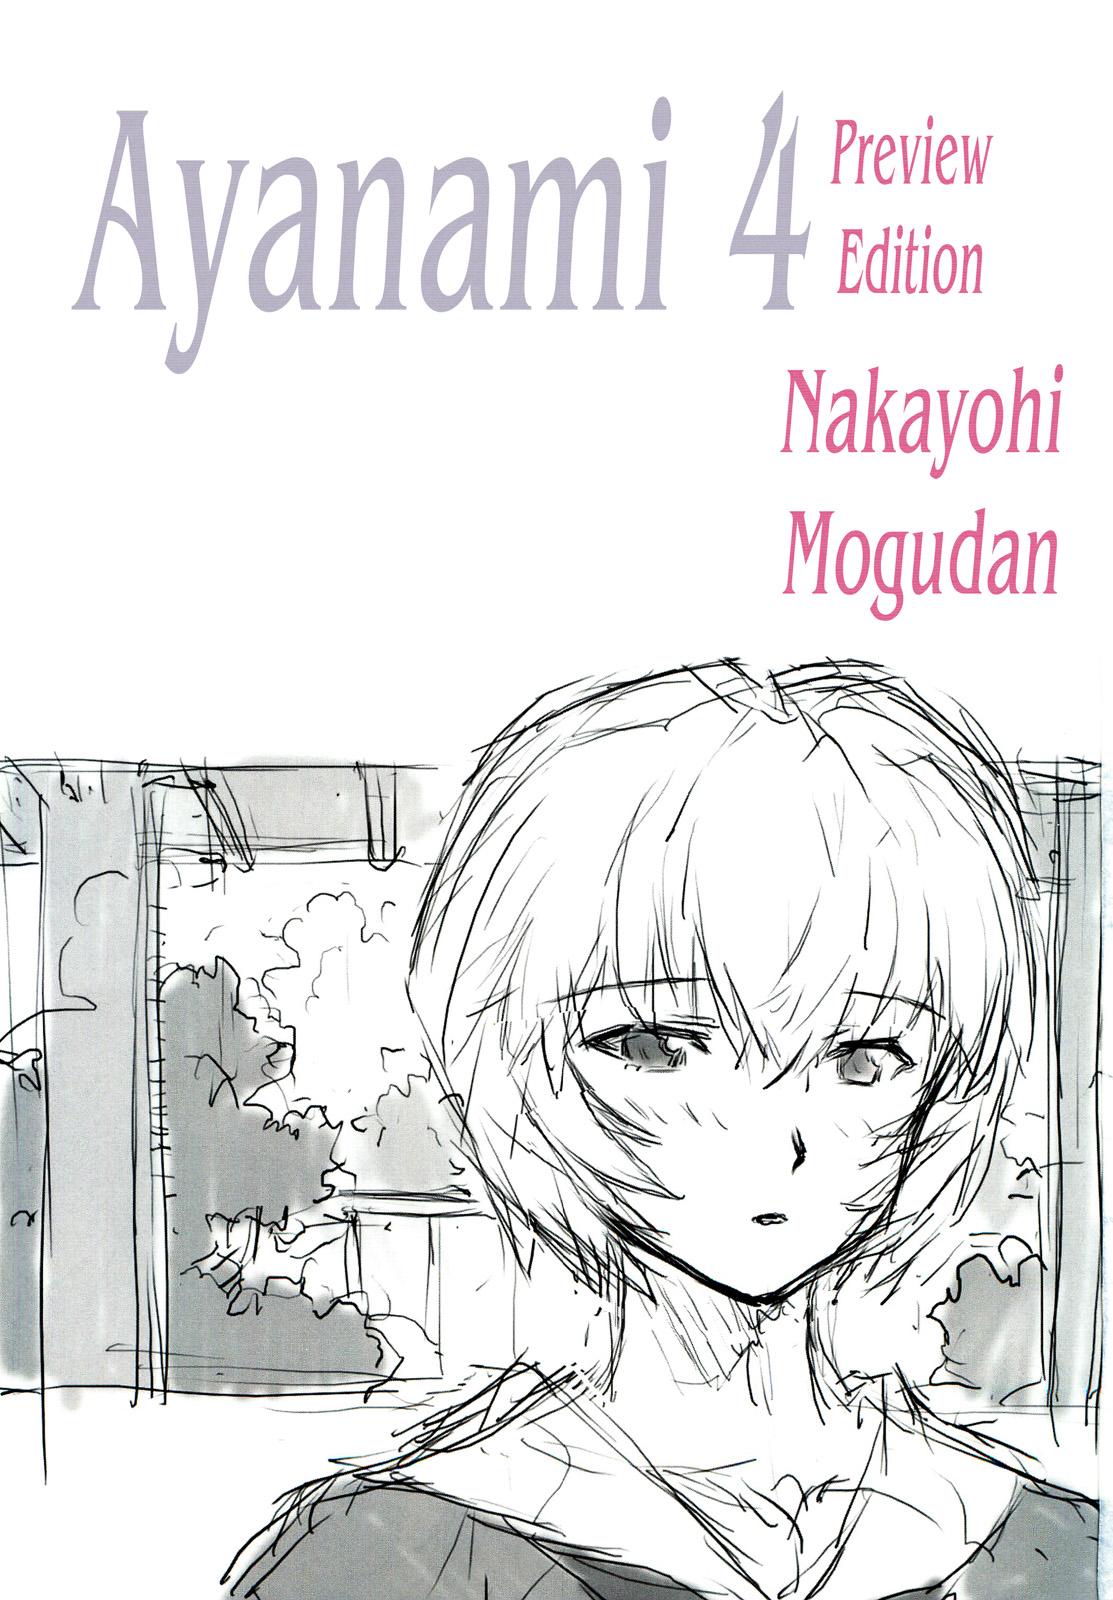 Pussy Fucking Ayanami Dai 4 Kai Pure Han | Ayanami 4 Preview Edition - Neon genesis evangelion Shoplifter - Page 3